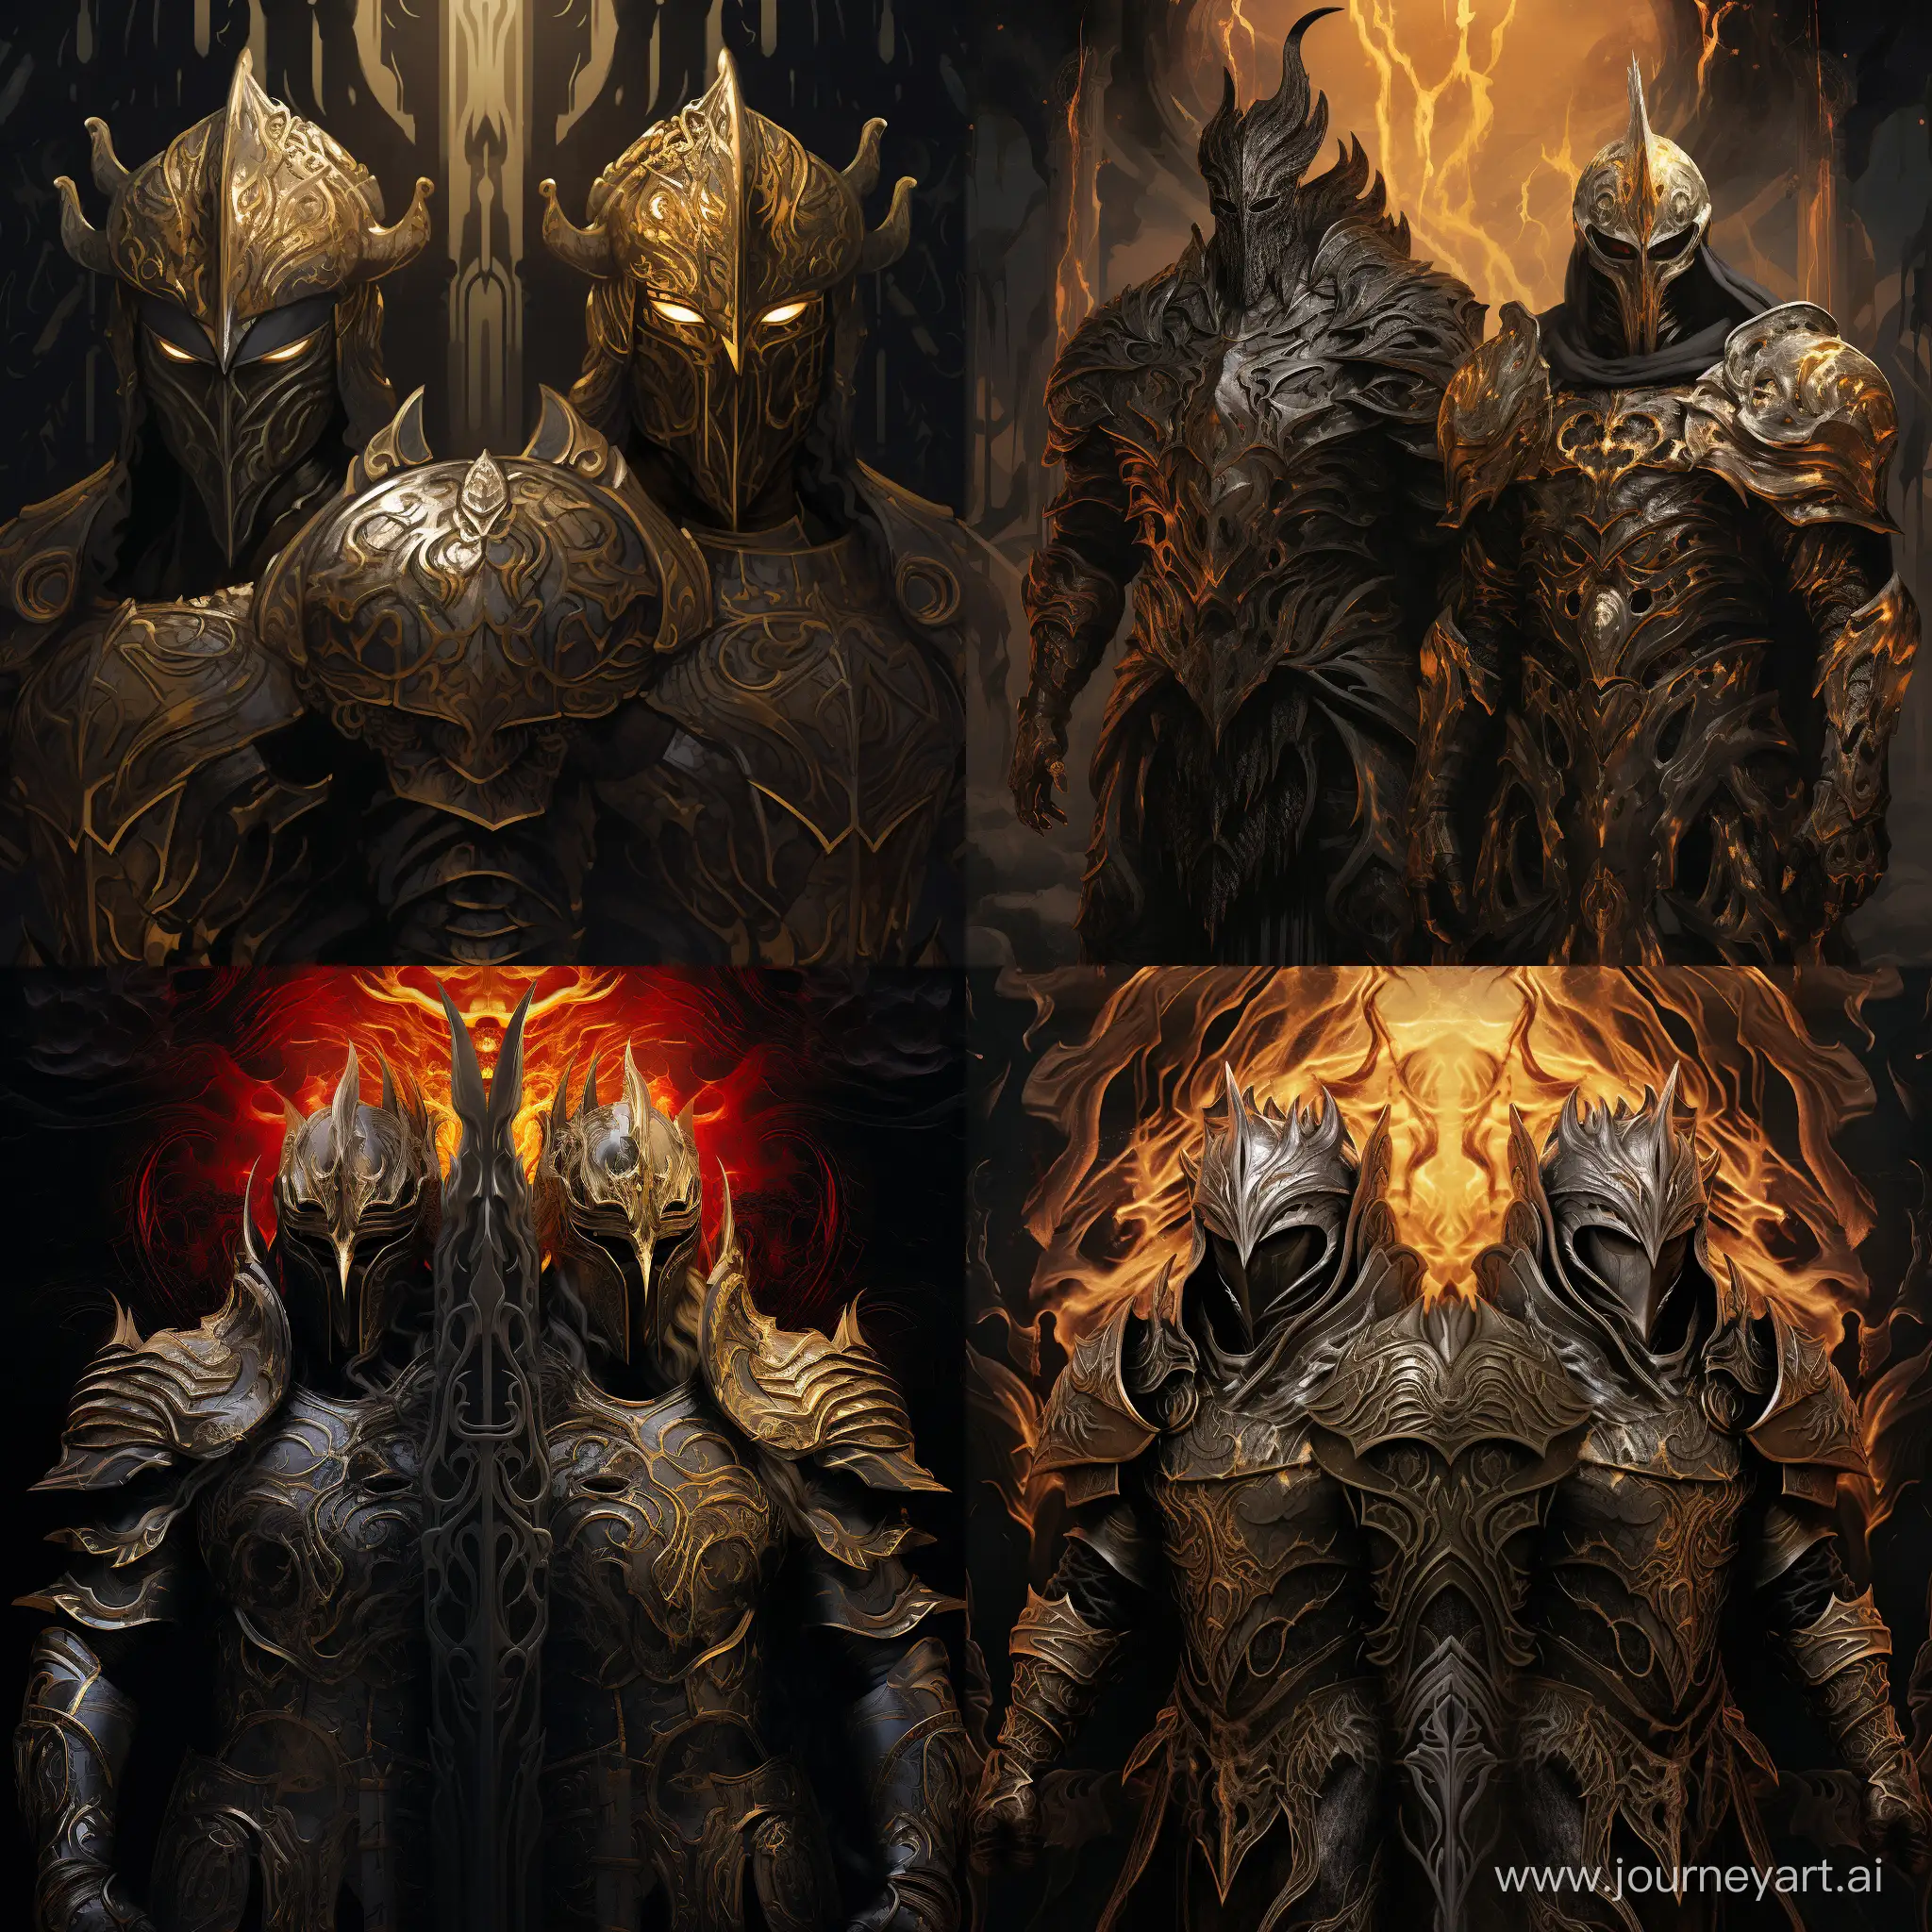 Majestic-Knights-in-Battle-Striking-BlackandGold-and-White-Armored-Warriors